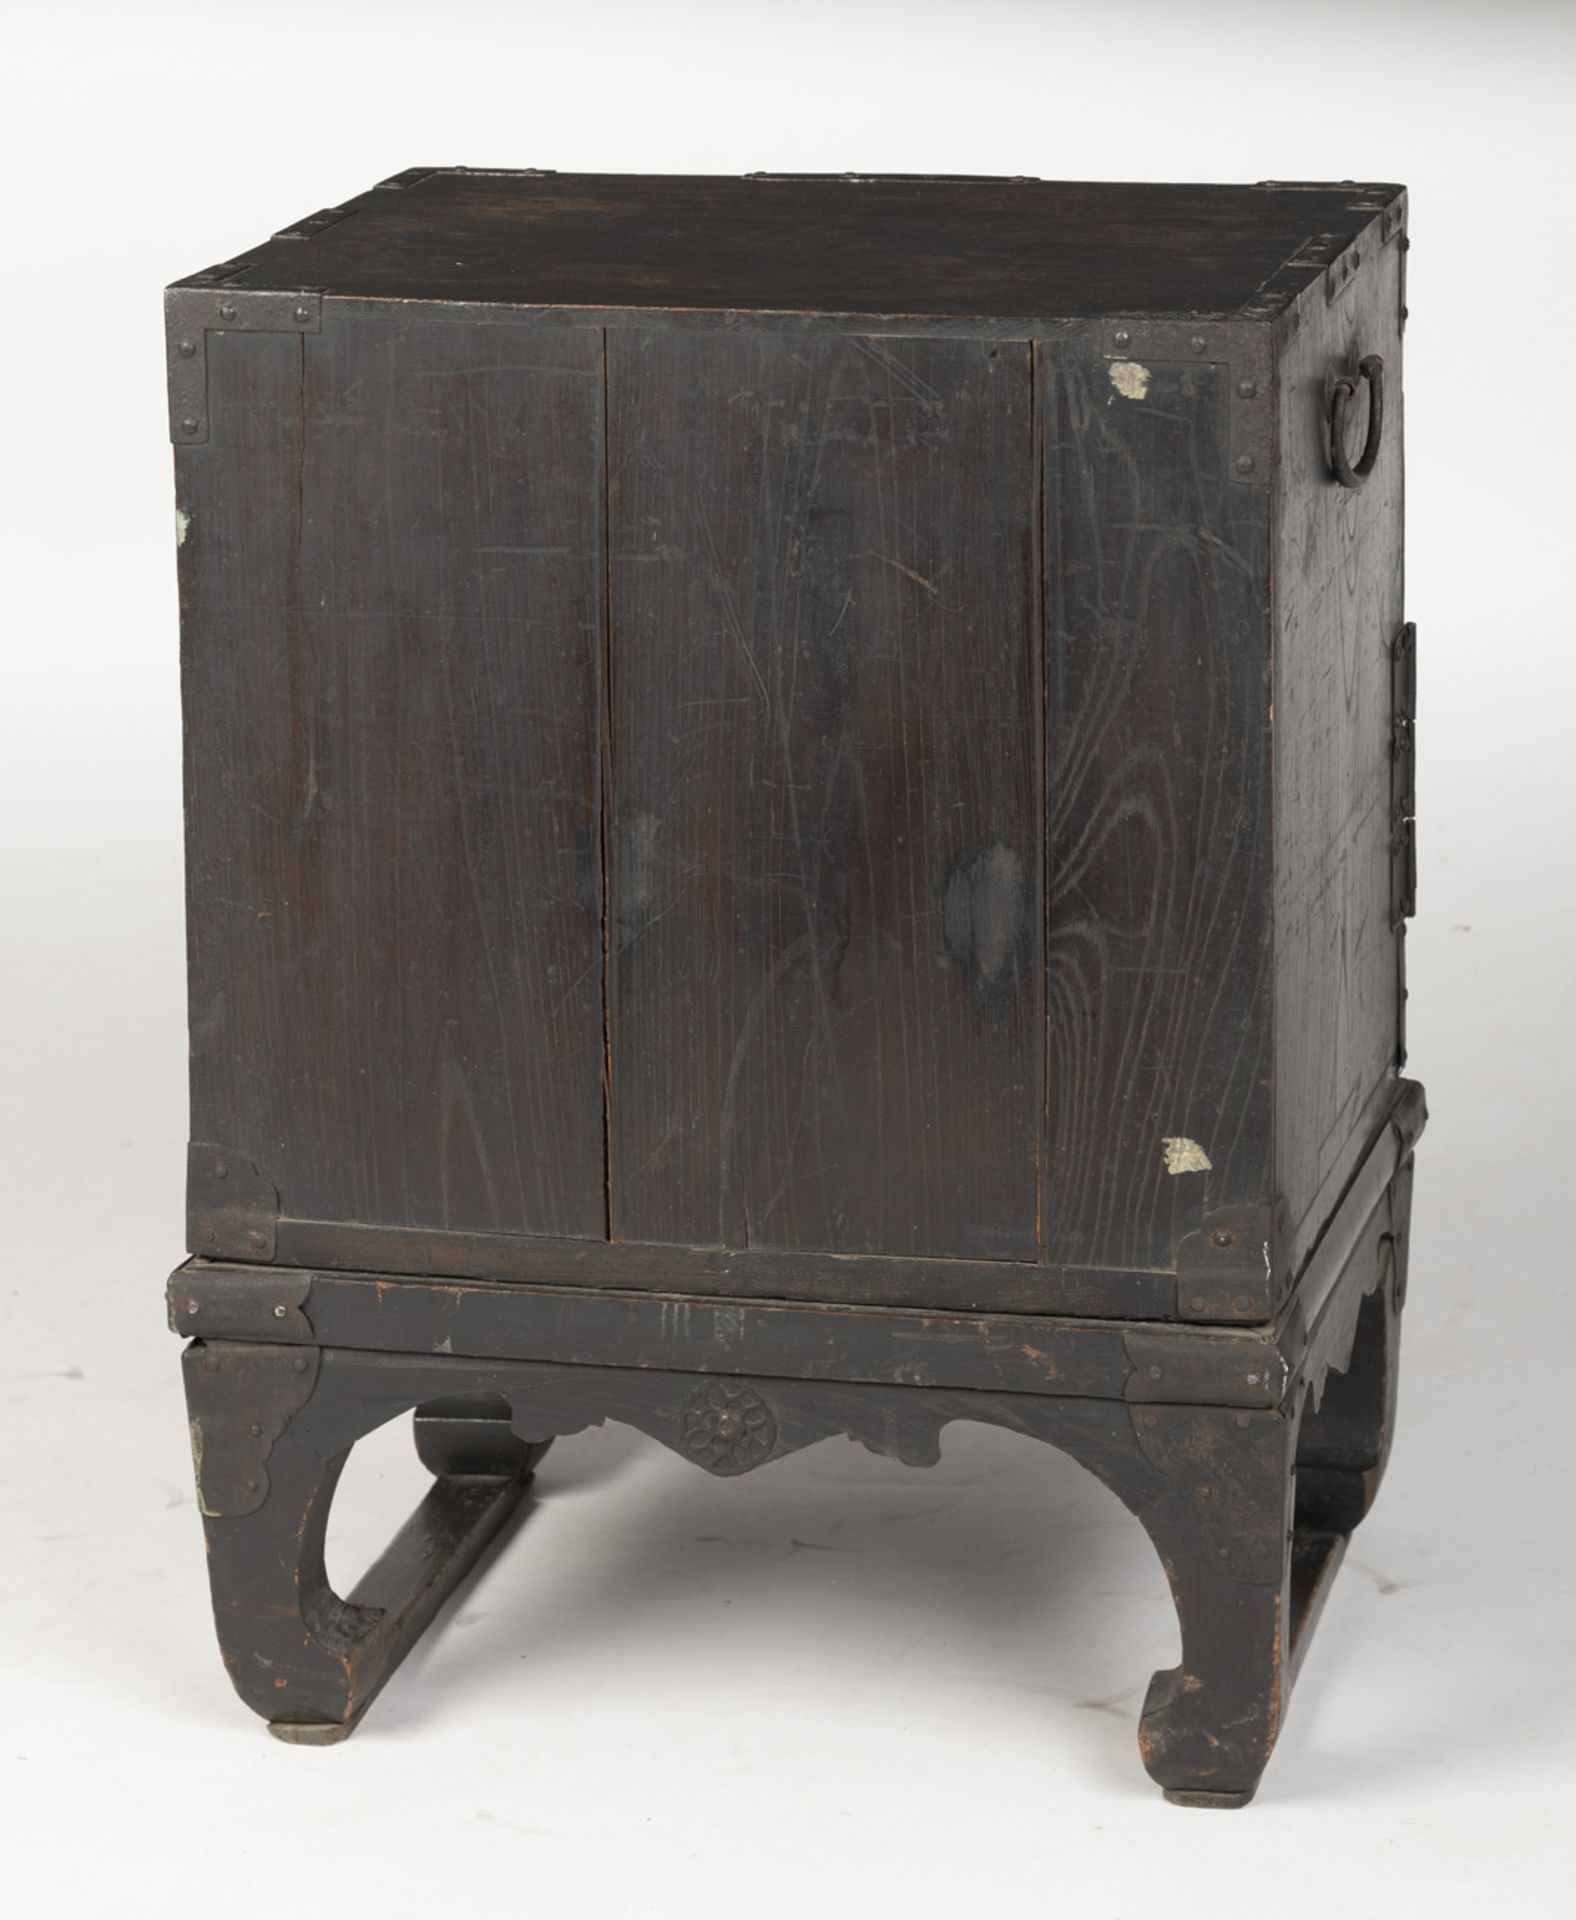 A WOODEN CHEST FOR USE ON A SHIP (FUNA DANSU) WITH IRON FITTINGS ON A STAND - Image 4 of 4